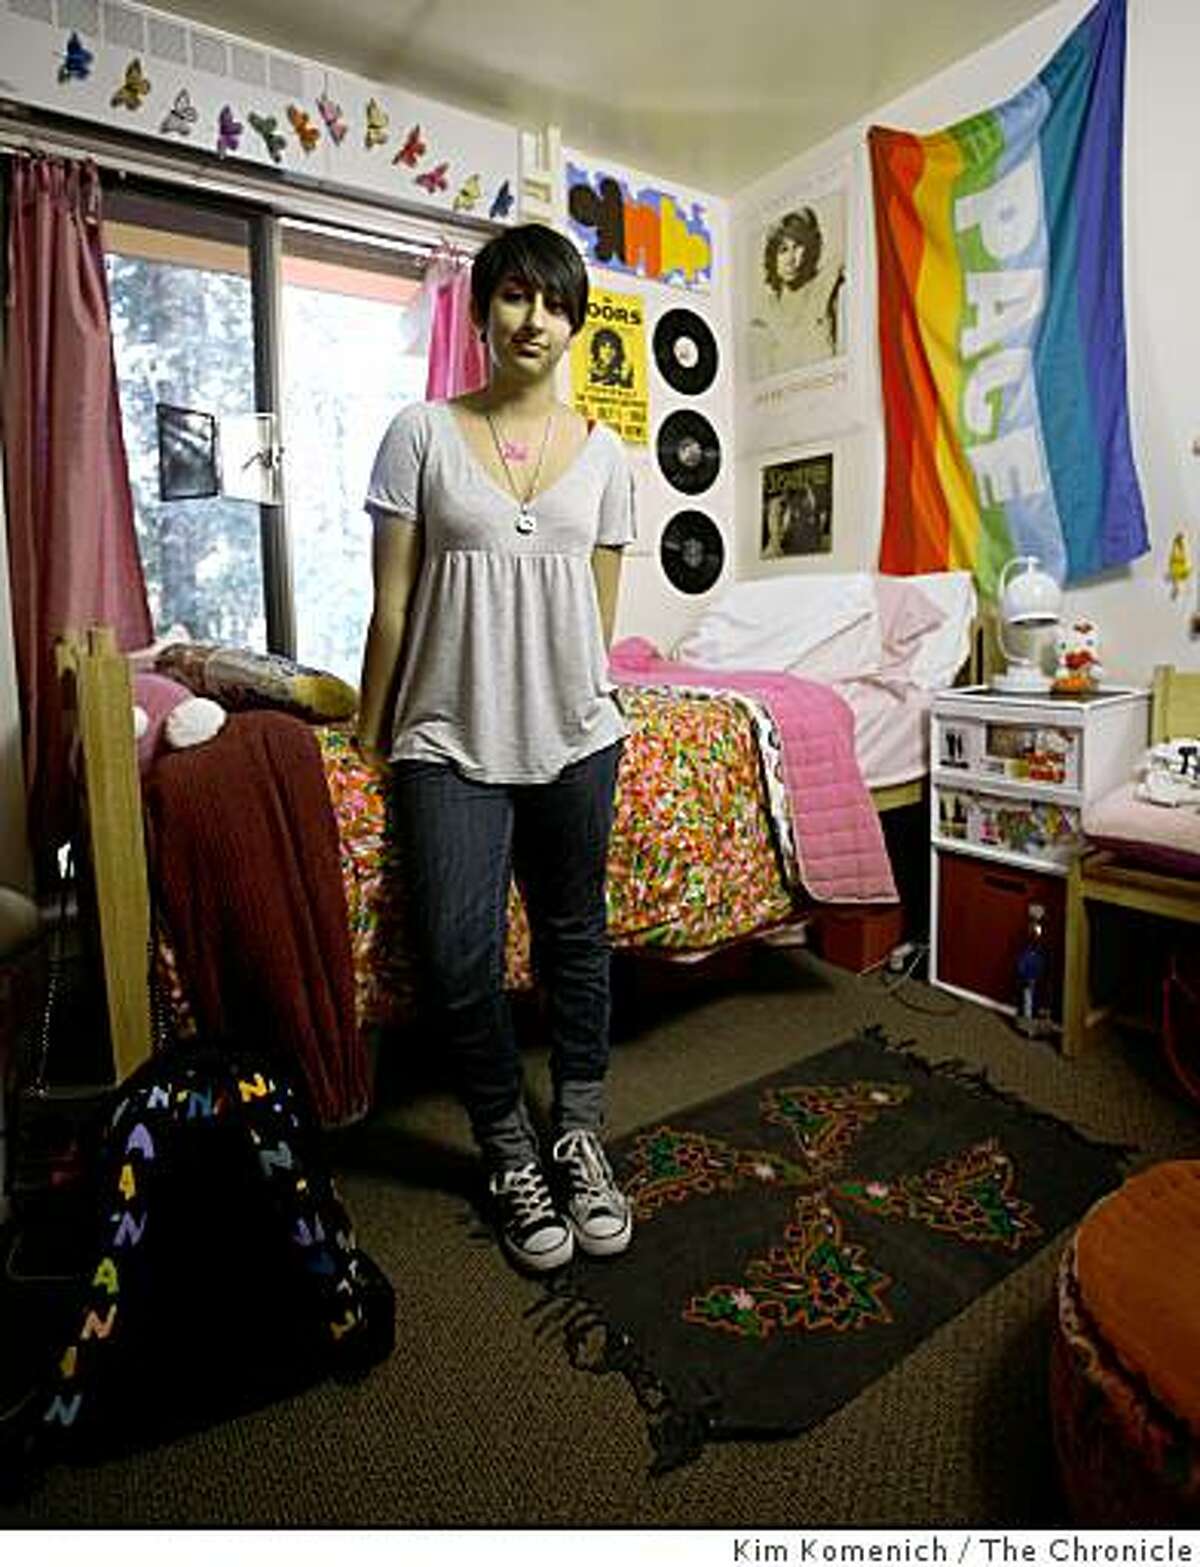 Saachi Dhingra, stands in her dorm room at UC Santa Cruz in Santa Cruz, Calif. Her parents thought they had saved enough money for four years of private or public college and at least a part of medical school. Now the market has shrunk that fund so much that she will have to rely on aid for the last year at the public UC Santa Cruz and is on her own for graduate school.